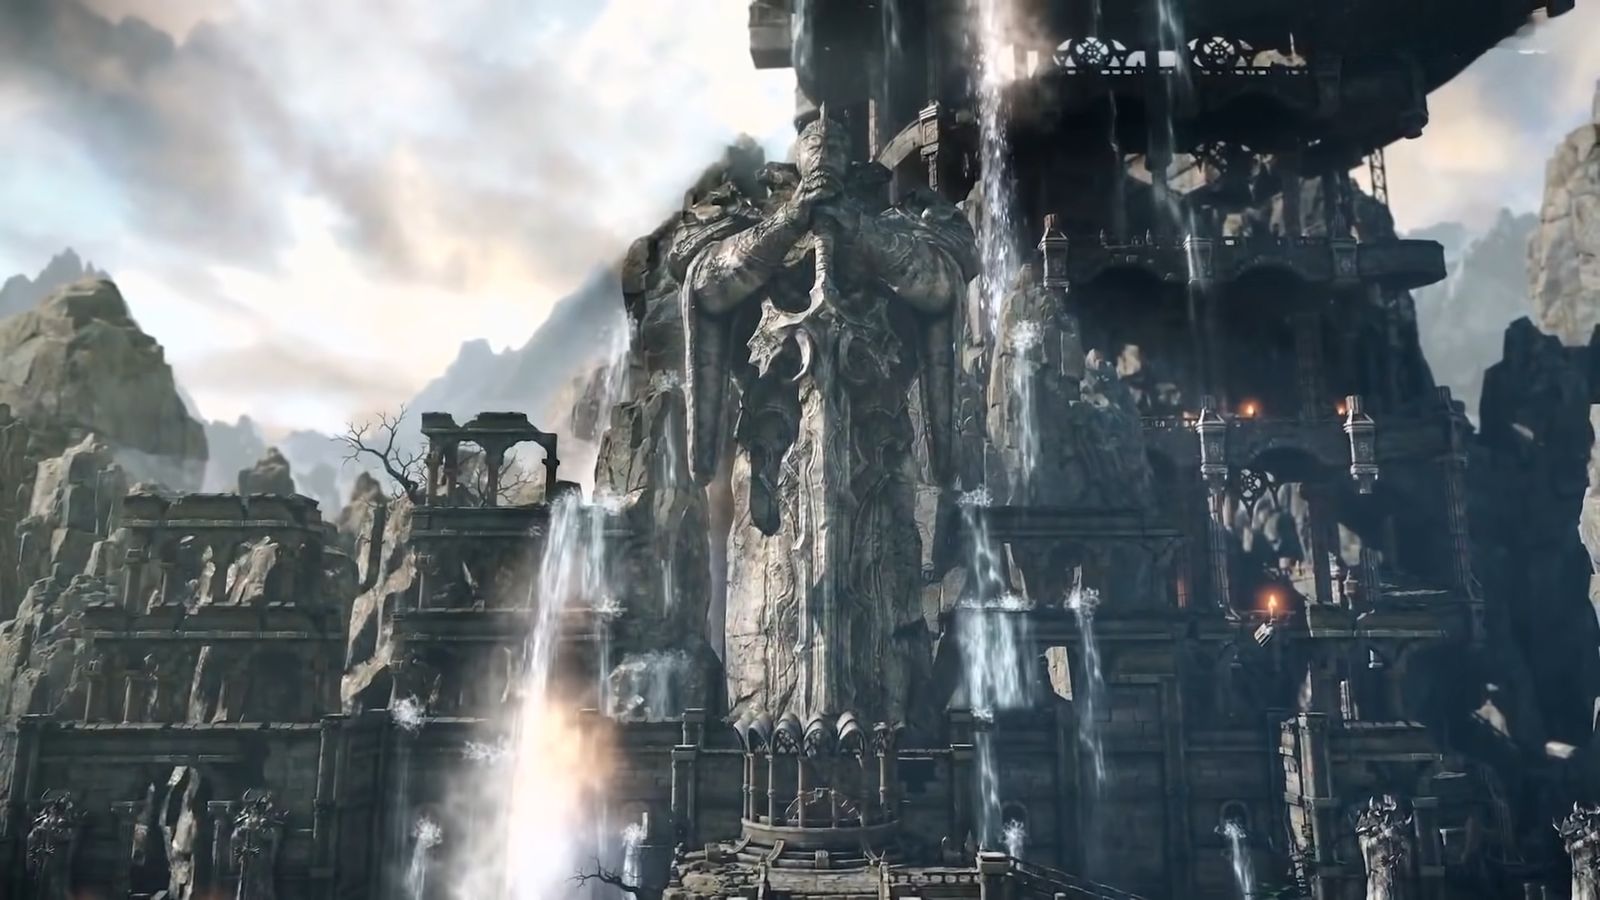 An image of a stone city from Lost Ark, including a huge statue of a Knight